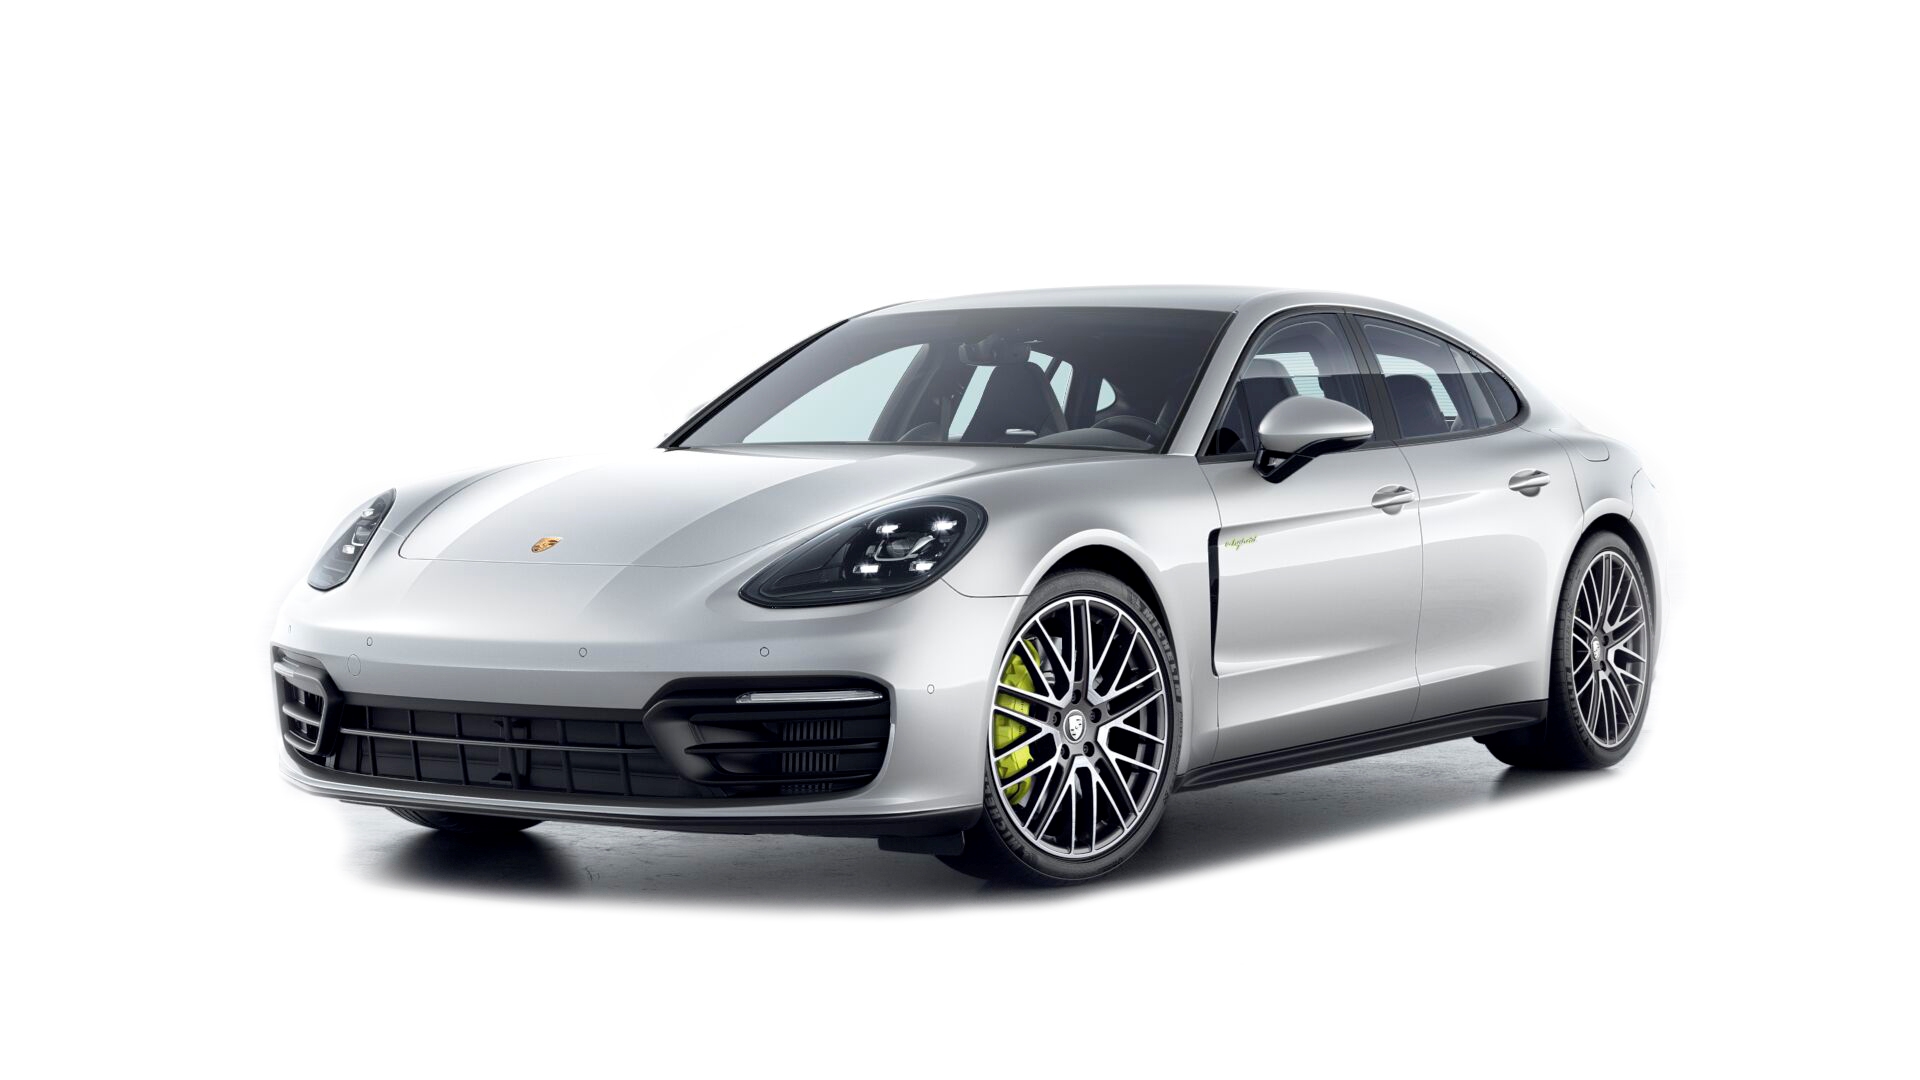 2022 Porsche Panamera 4 E-Hybrid Full Specs, Features and Price | CarBuzz